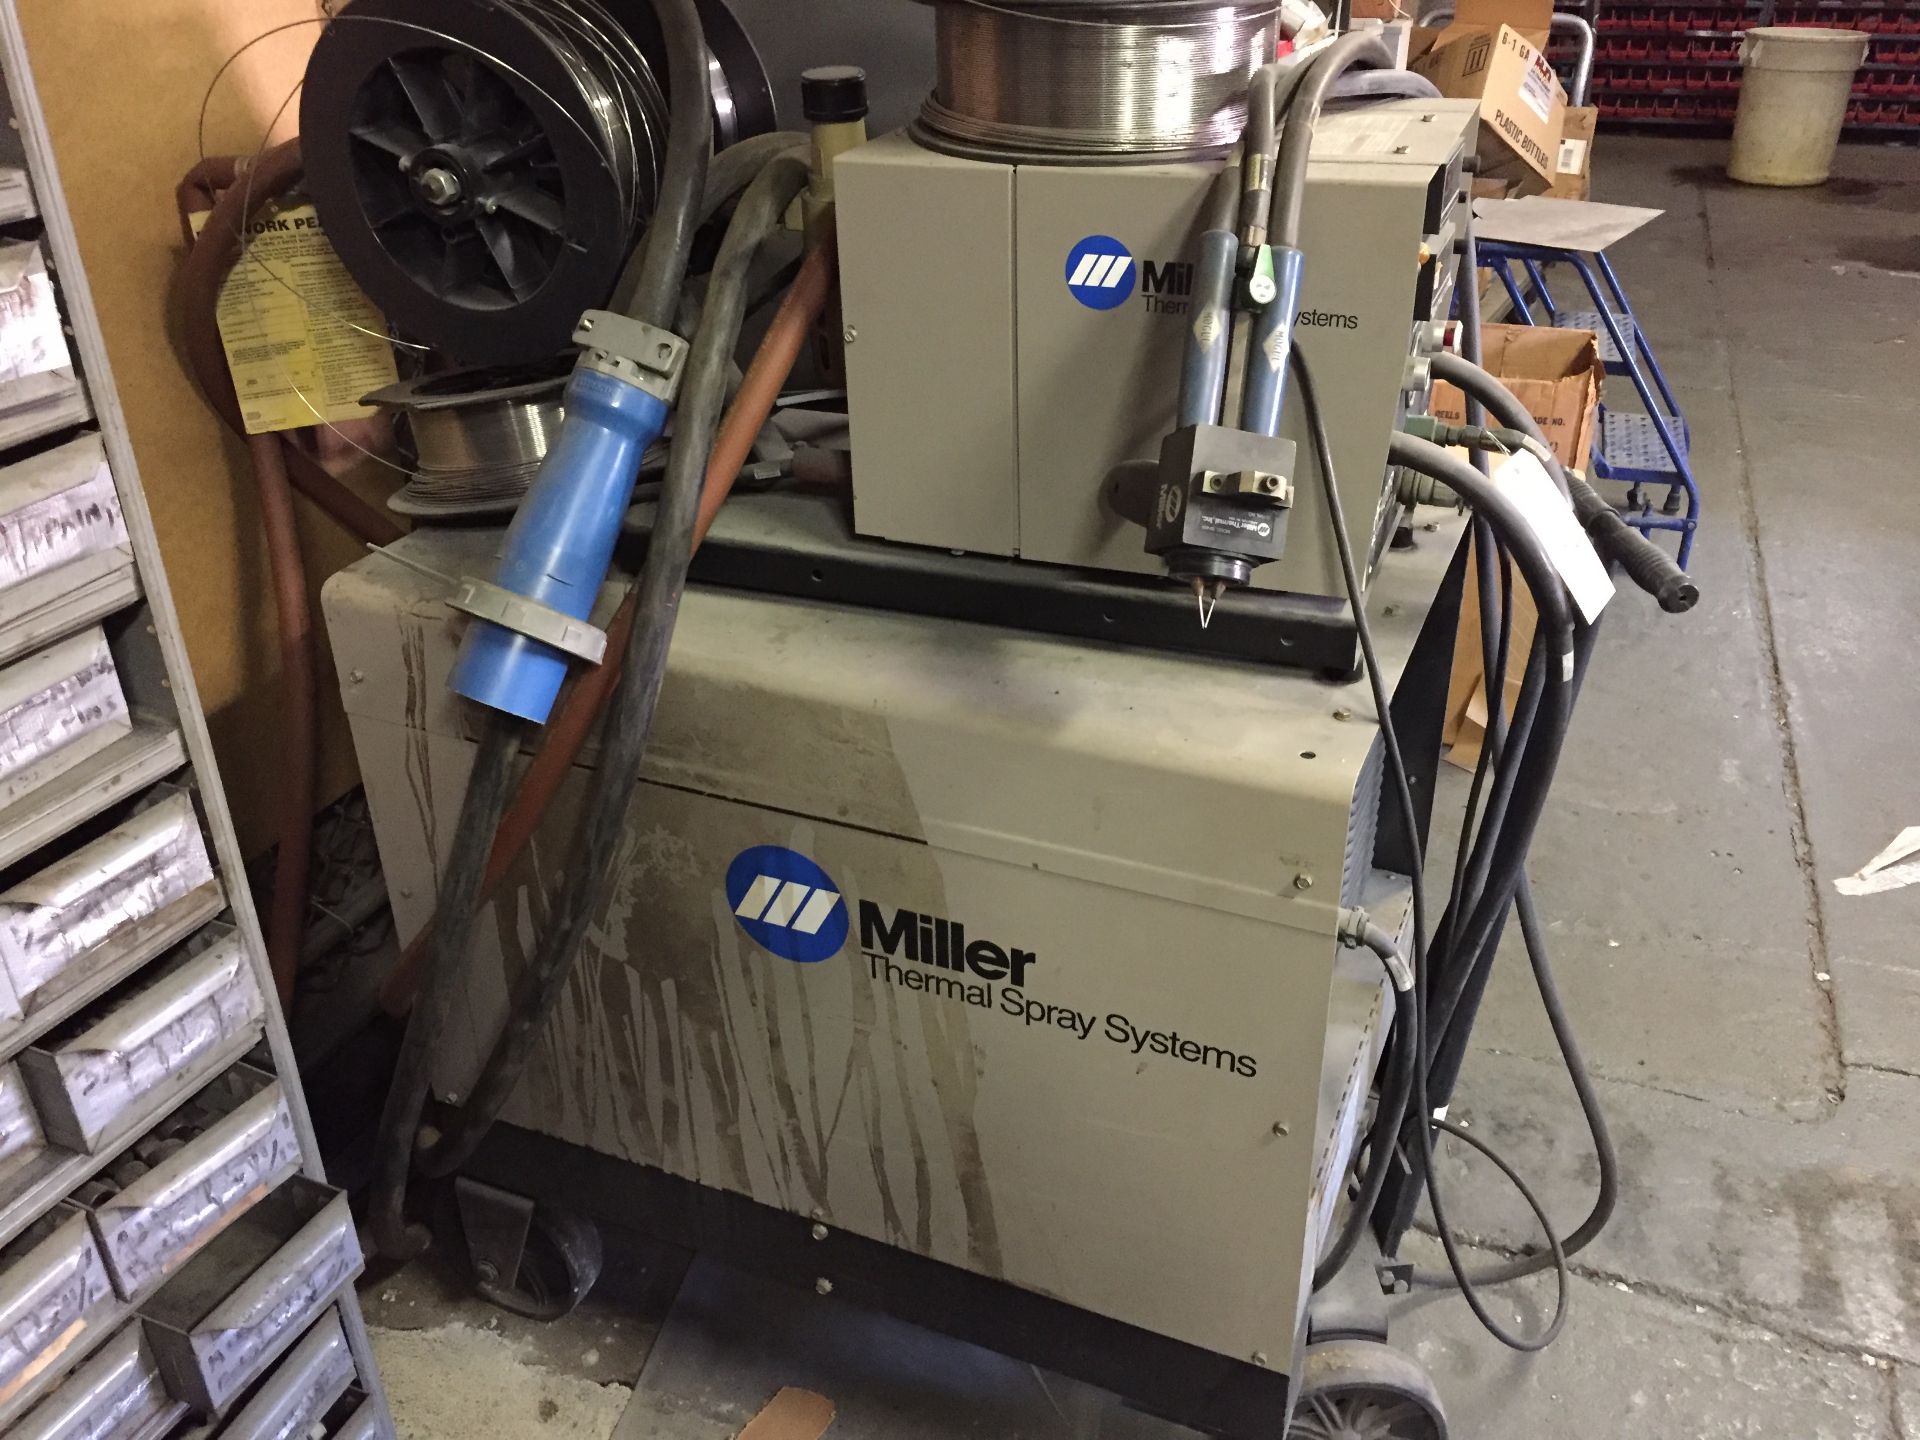 Miller Thermal Spray Systems Mogularc 400R Spray Welding Machine, 230/4 | Rigging/Loading Fee: $150 - Image 3 of 3